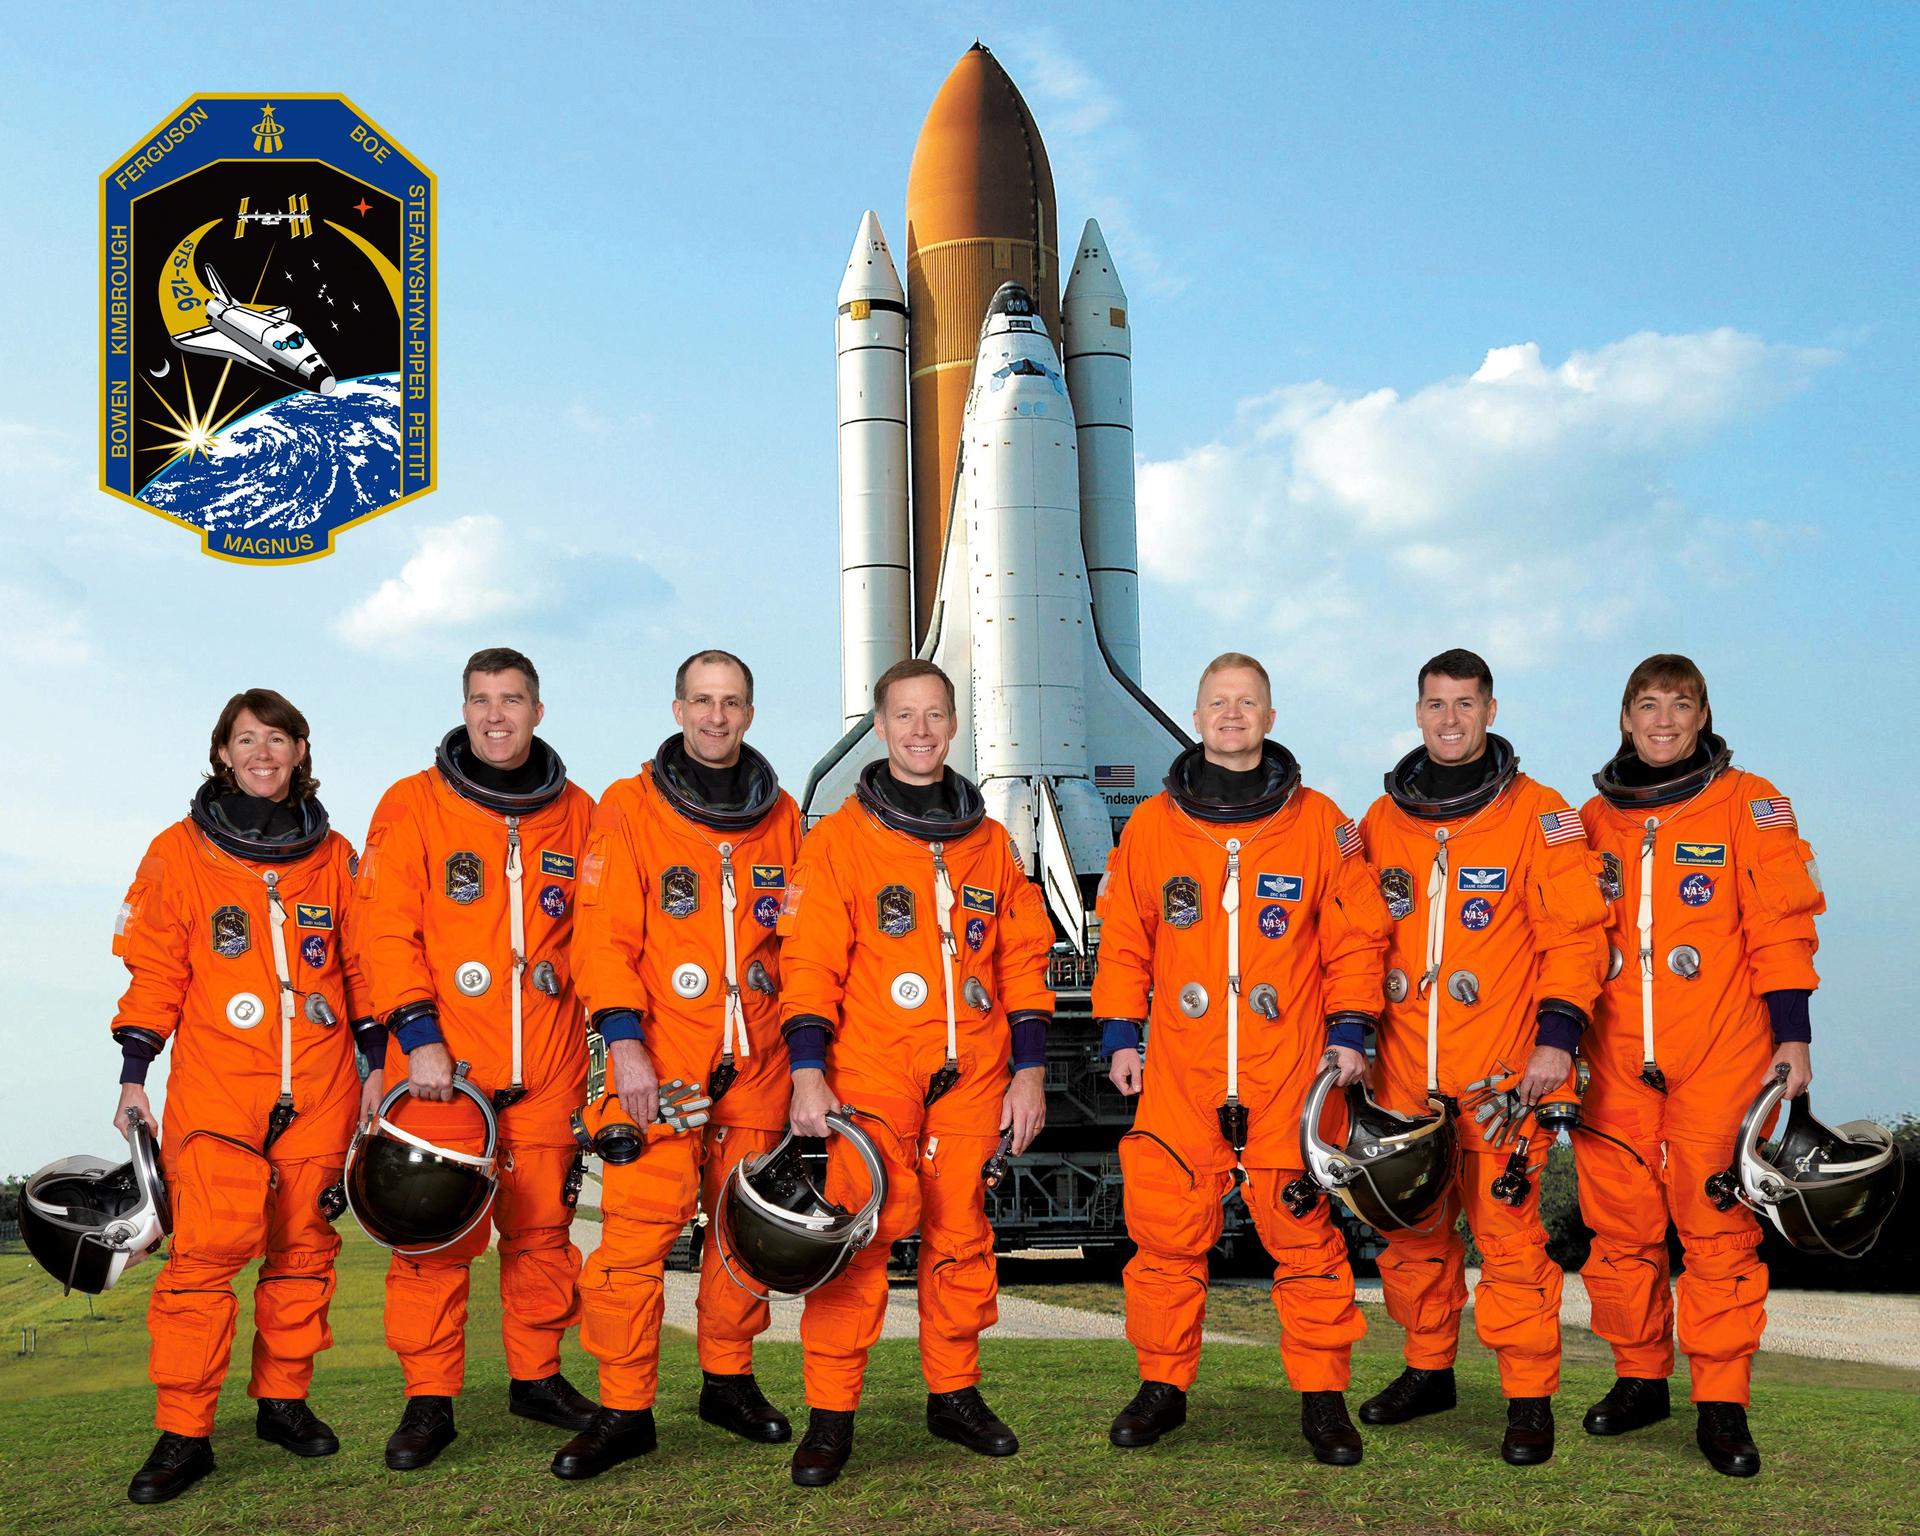 Attired in training versions of their shuttle launch and entry suits, the seven STS-126 crew members took a break from training to pose for the official crew portrait